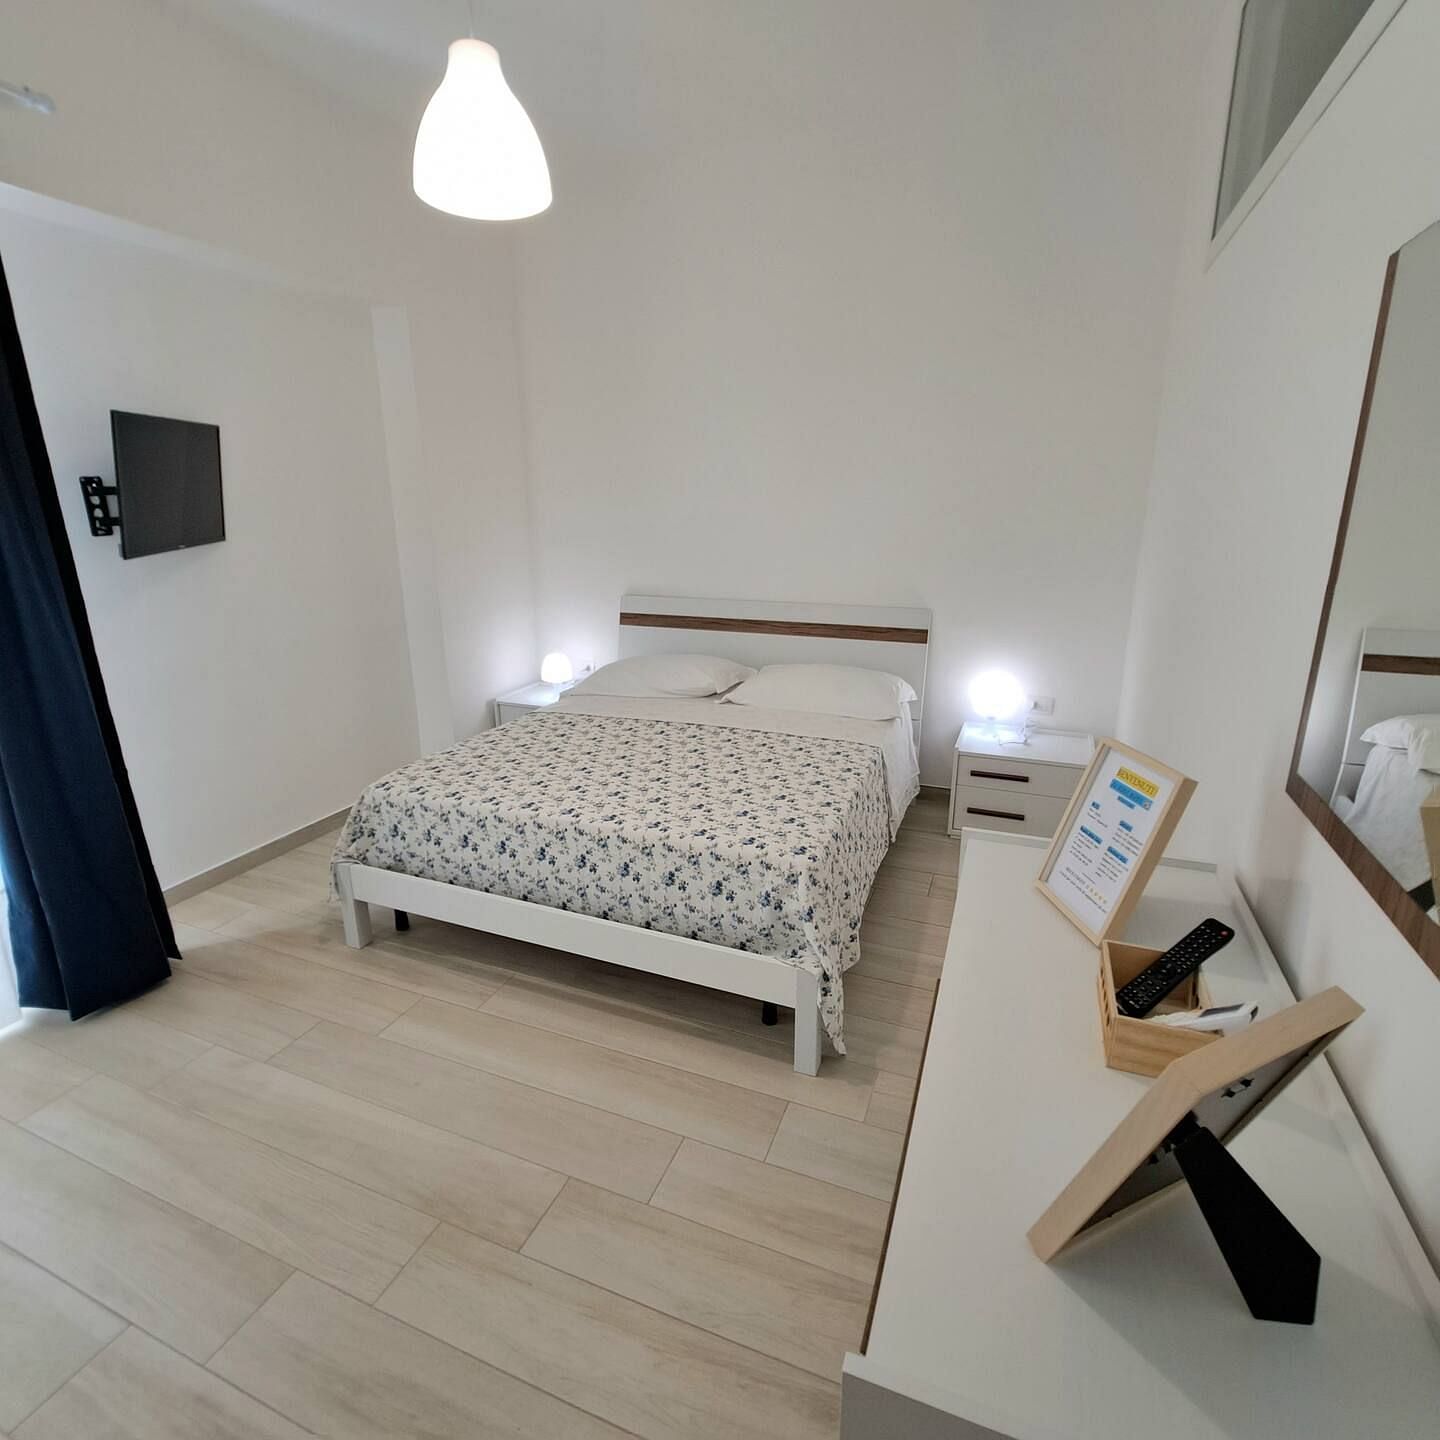 JWguest Apartment at Bacoli, Campania | Holiday Home Argento | Jwbnb no brobnb 11